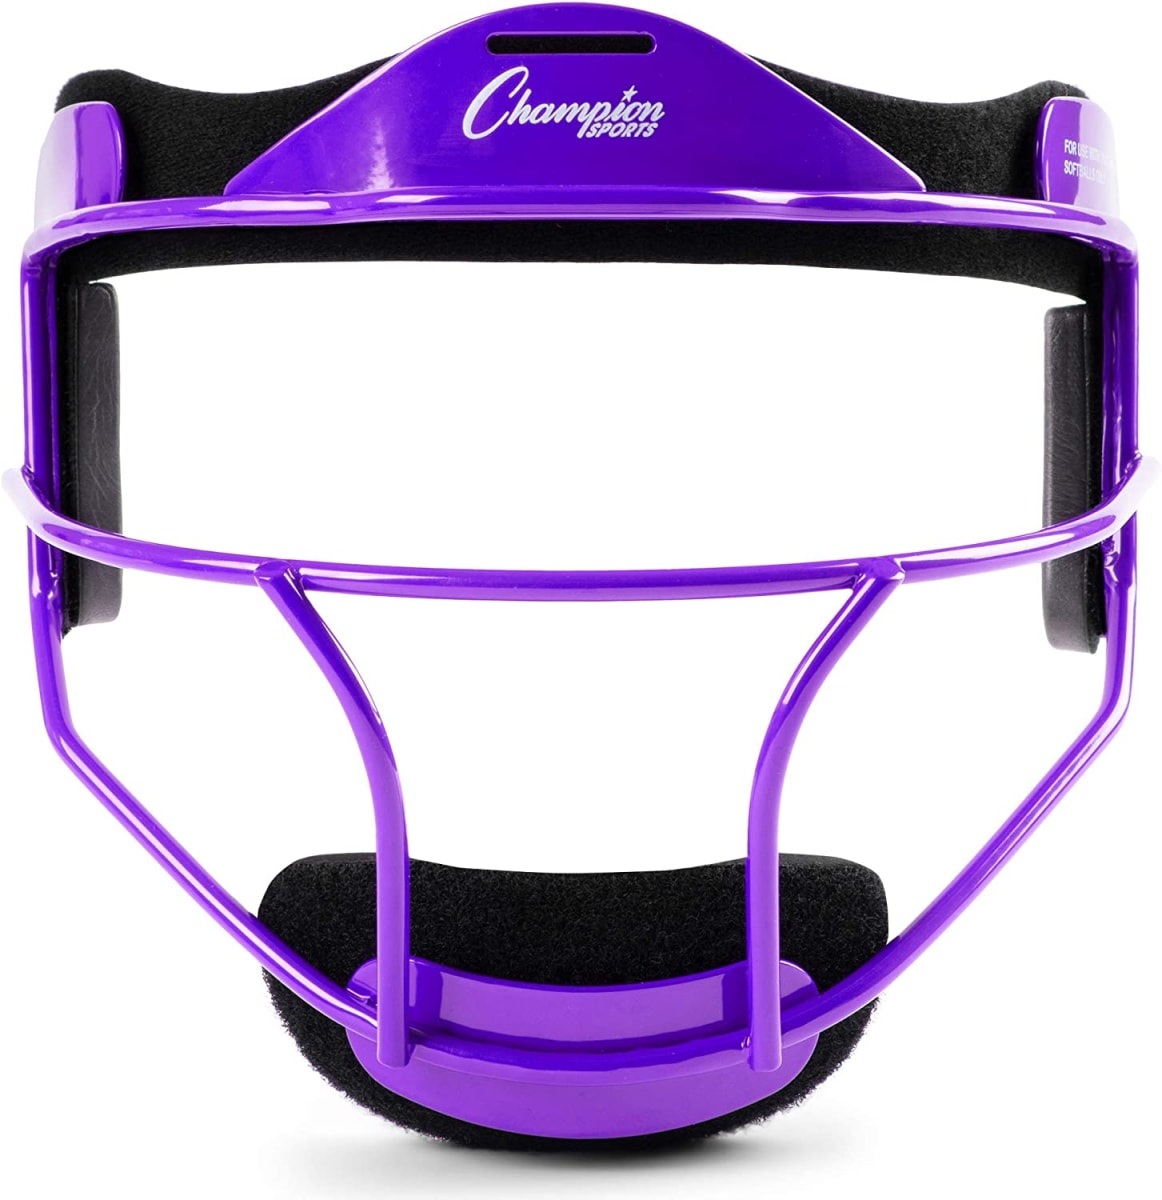 Softball Face Mask - Durable Fielder Head Guards - Premium Sports Accessories for Indoors and Outdoors - Magnesium or Steel in Multiple Colors and Sizes